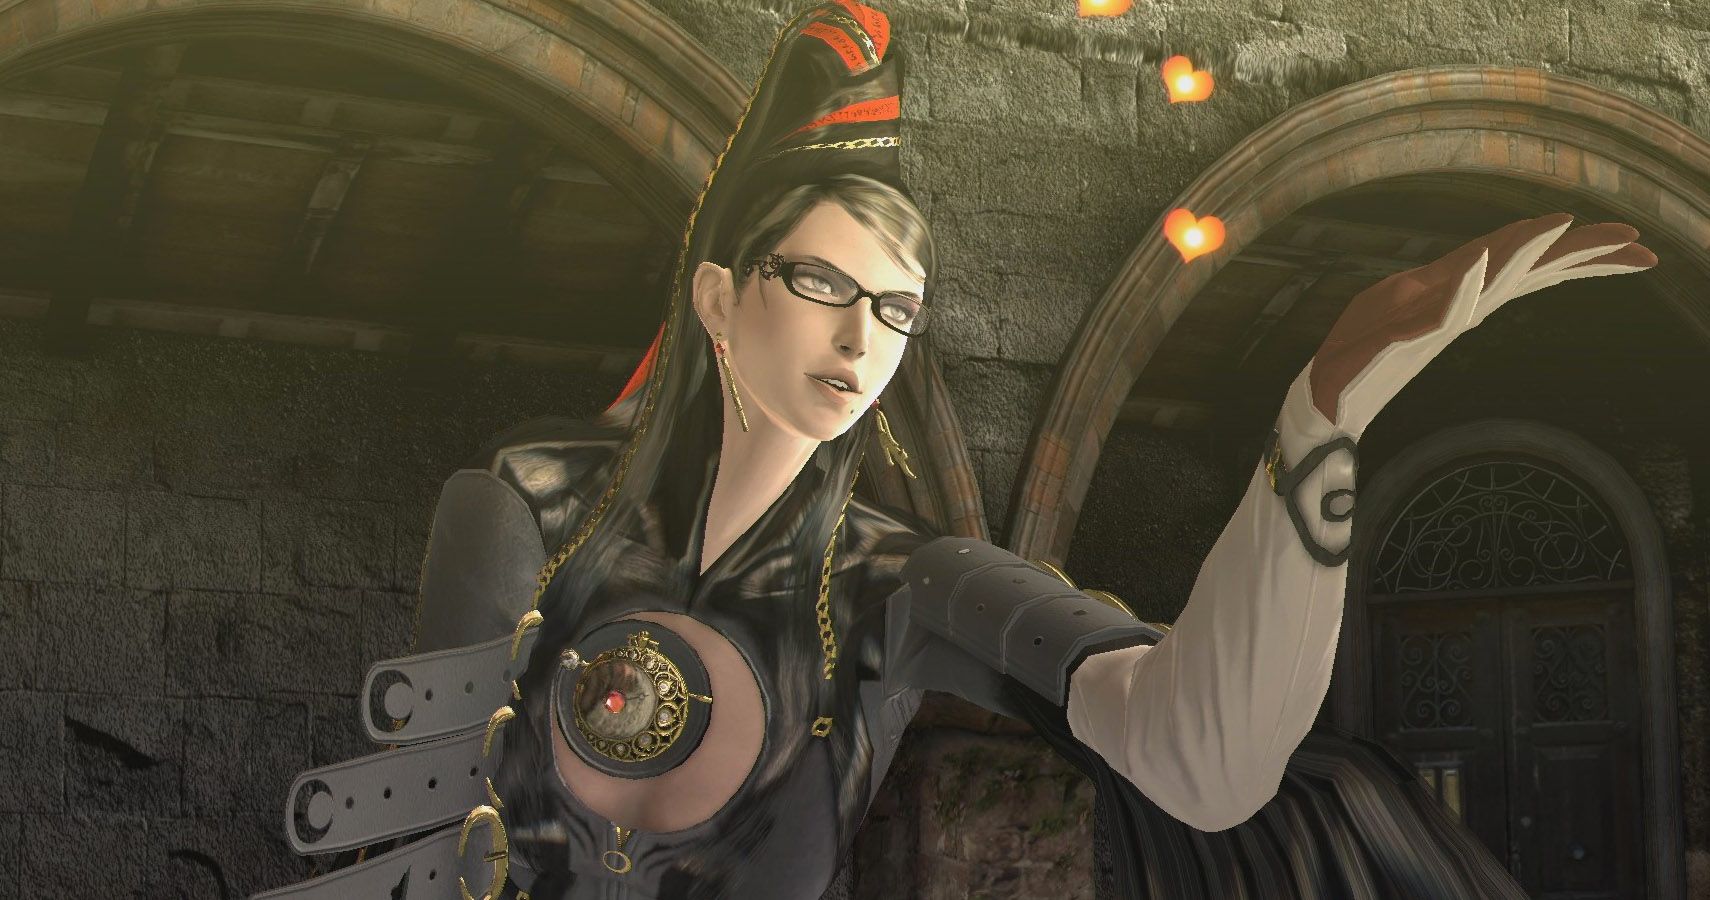 Bayonetta 3: Every New Gun, Ranked From Worst To Best